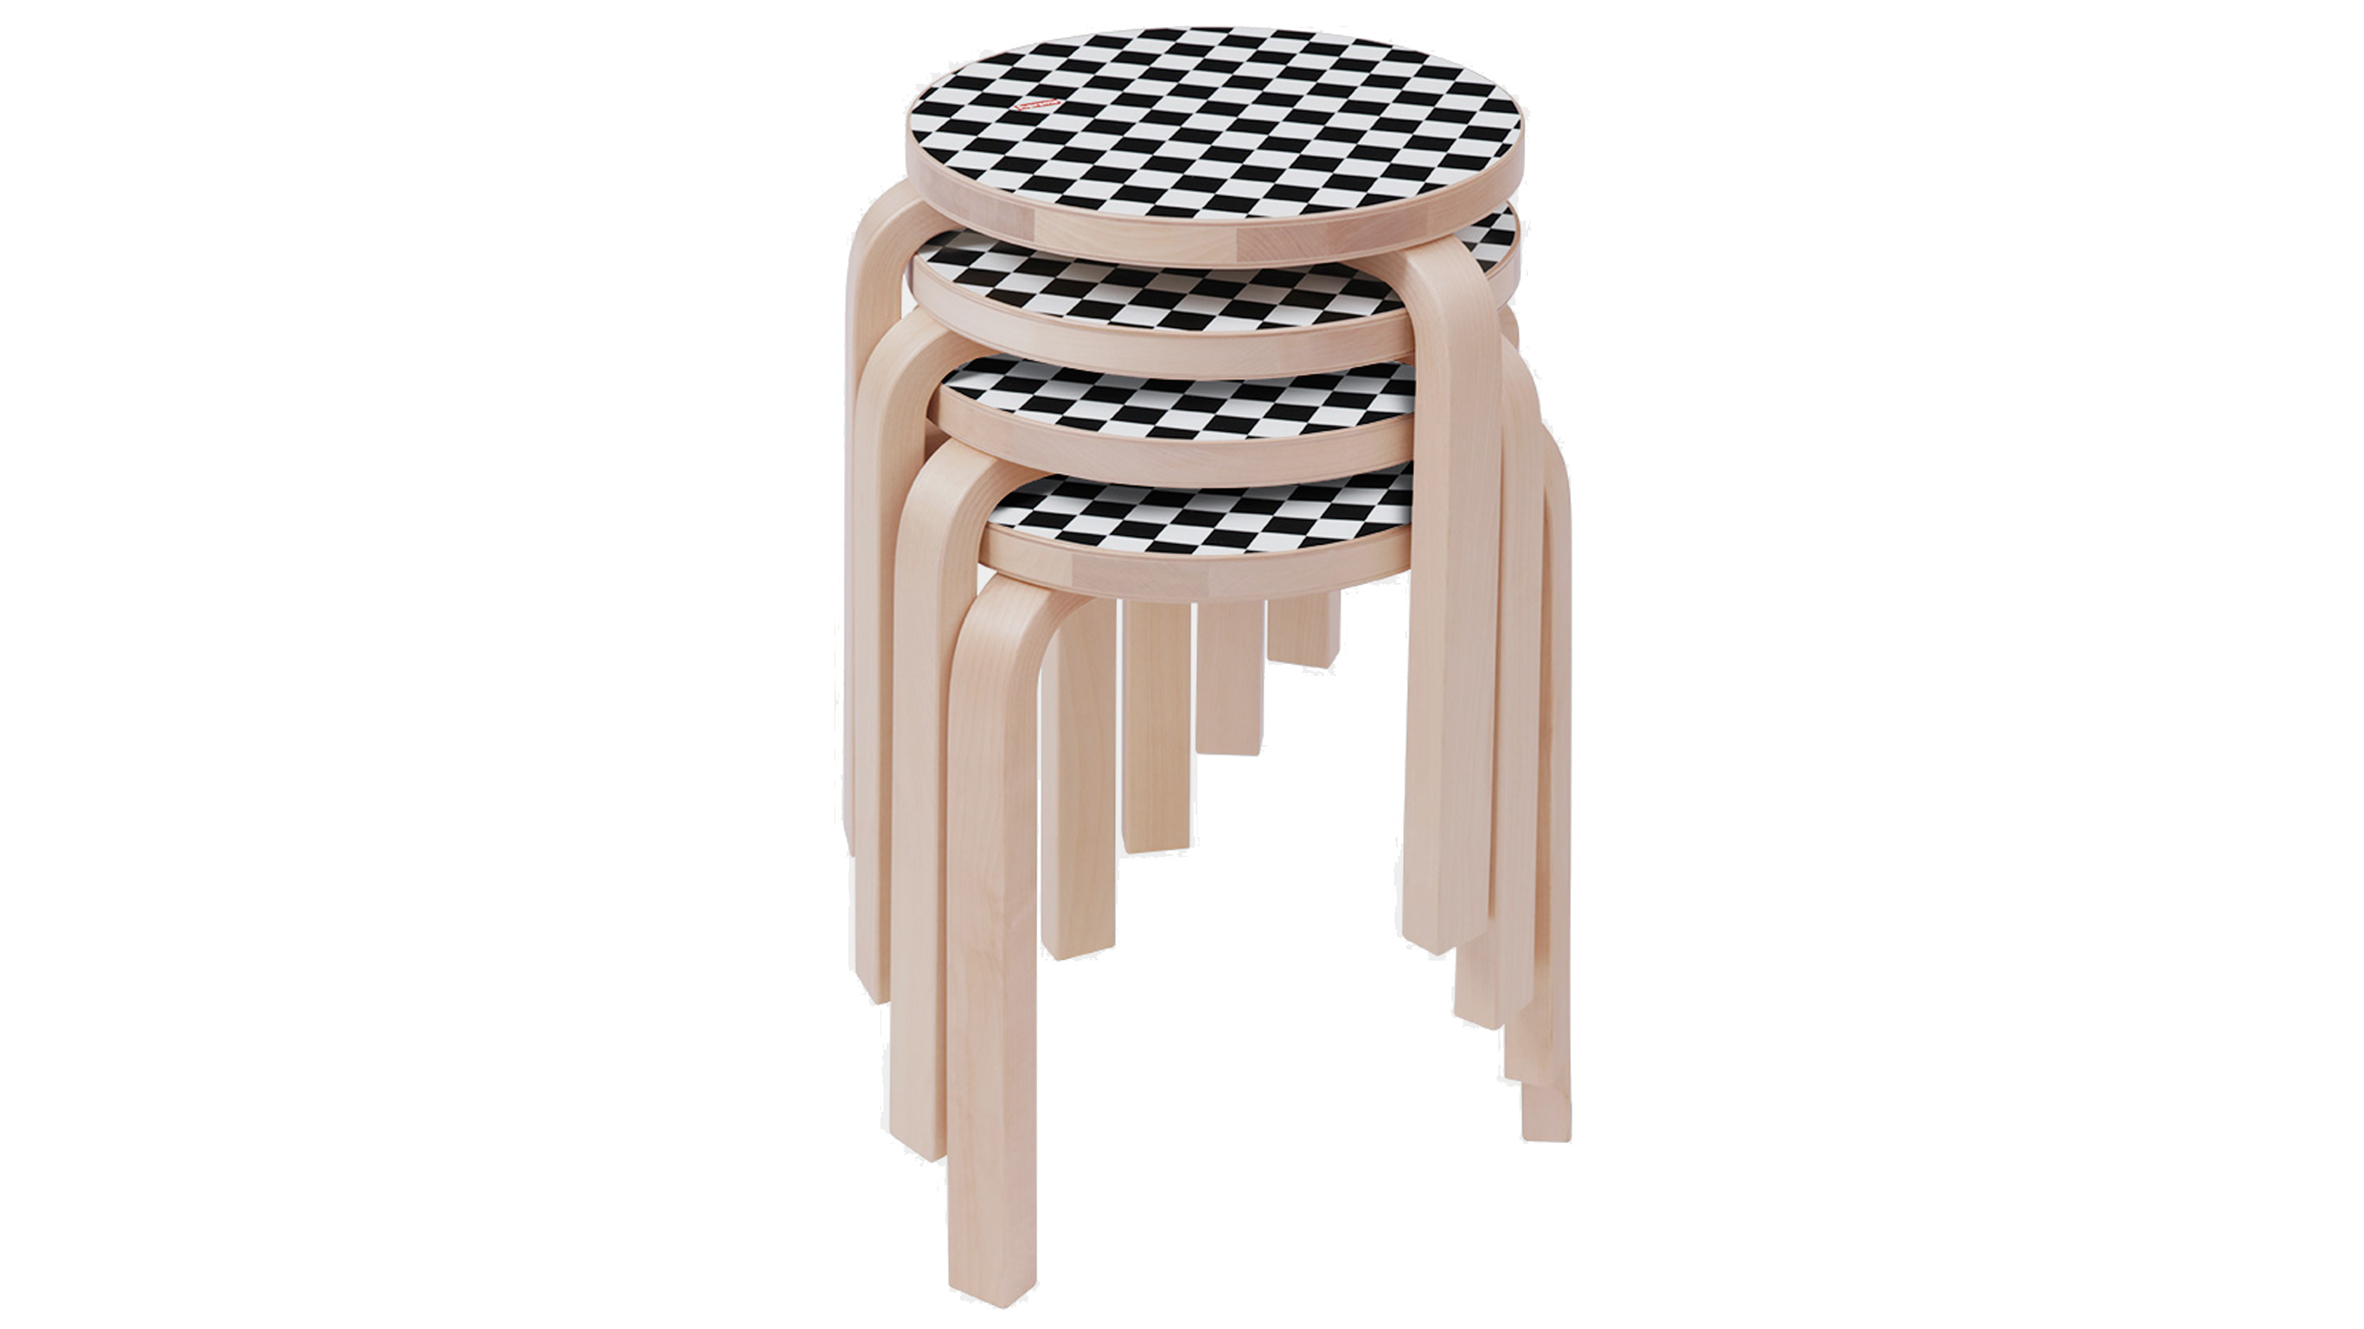 Supreme unveils chequerboard edition of Artek's iconic Aalto Stool 60